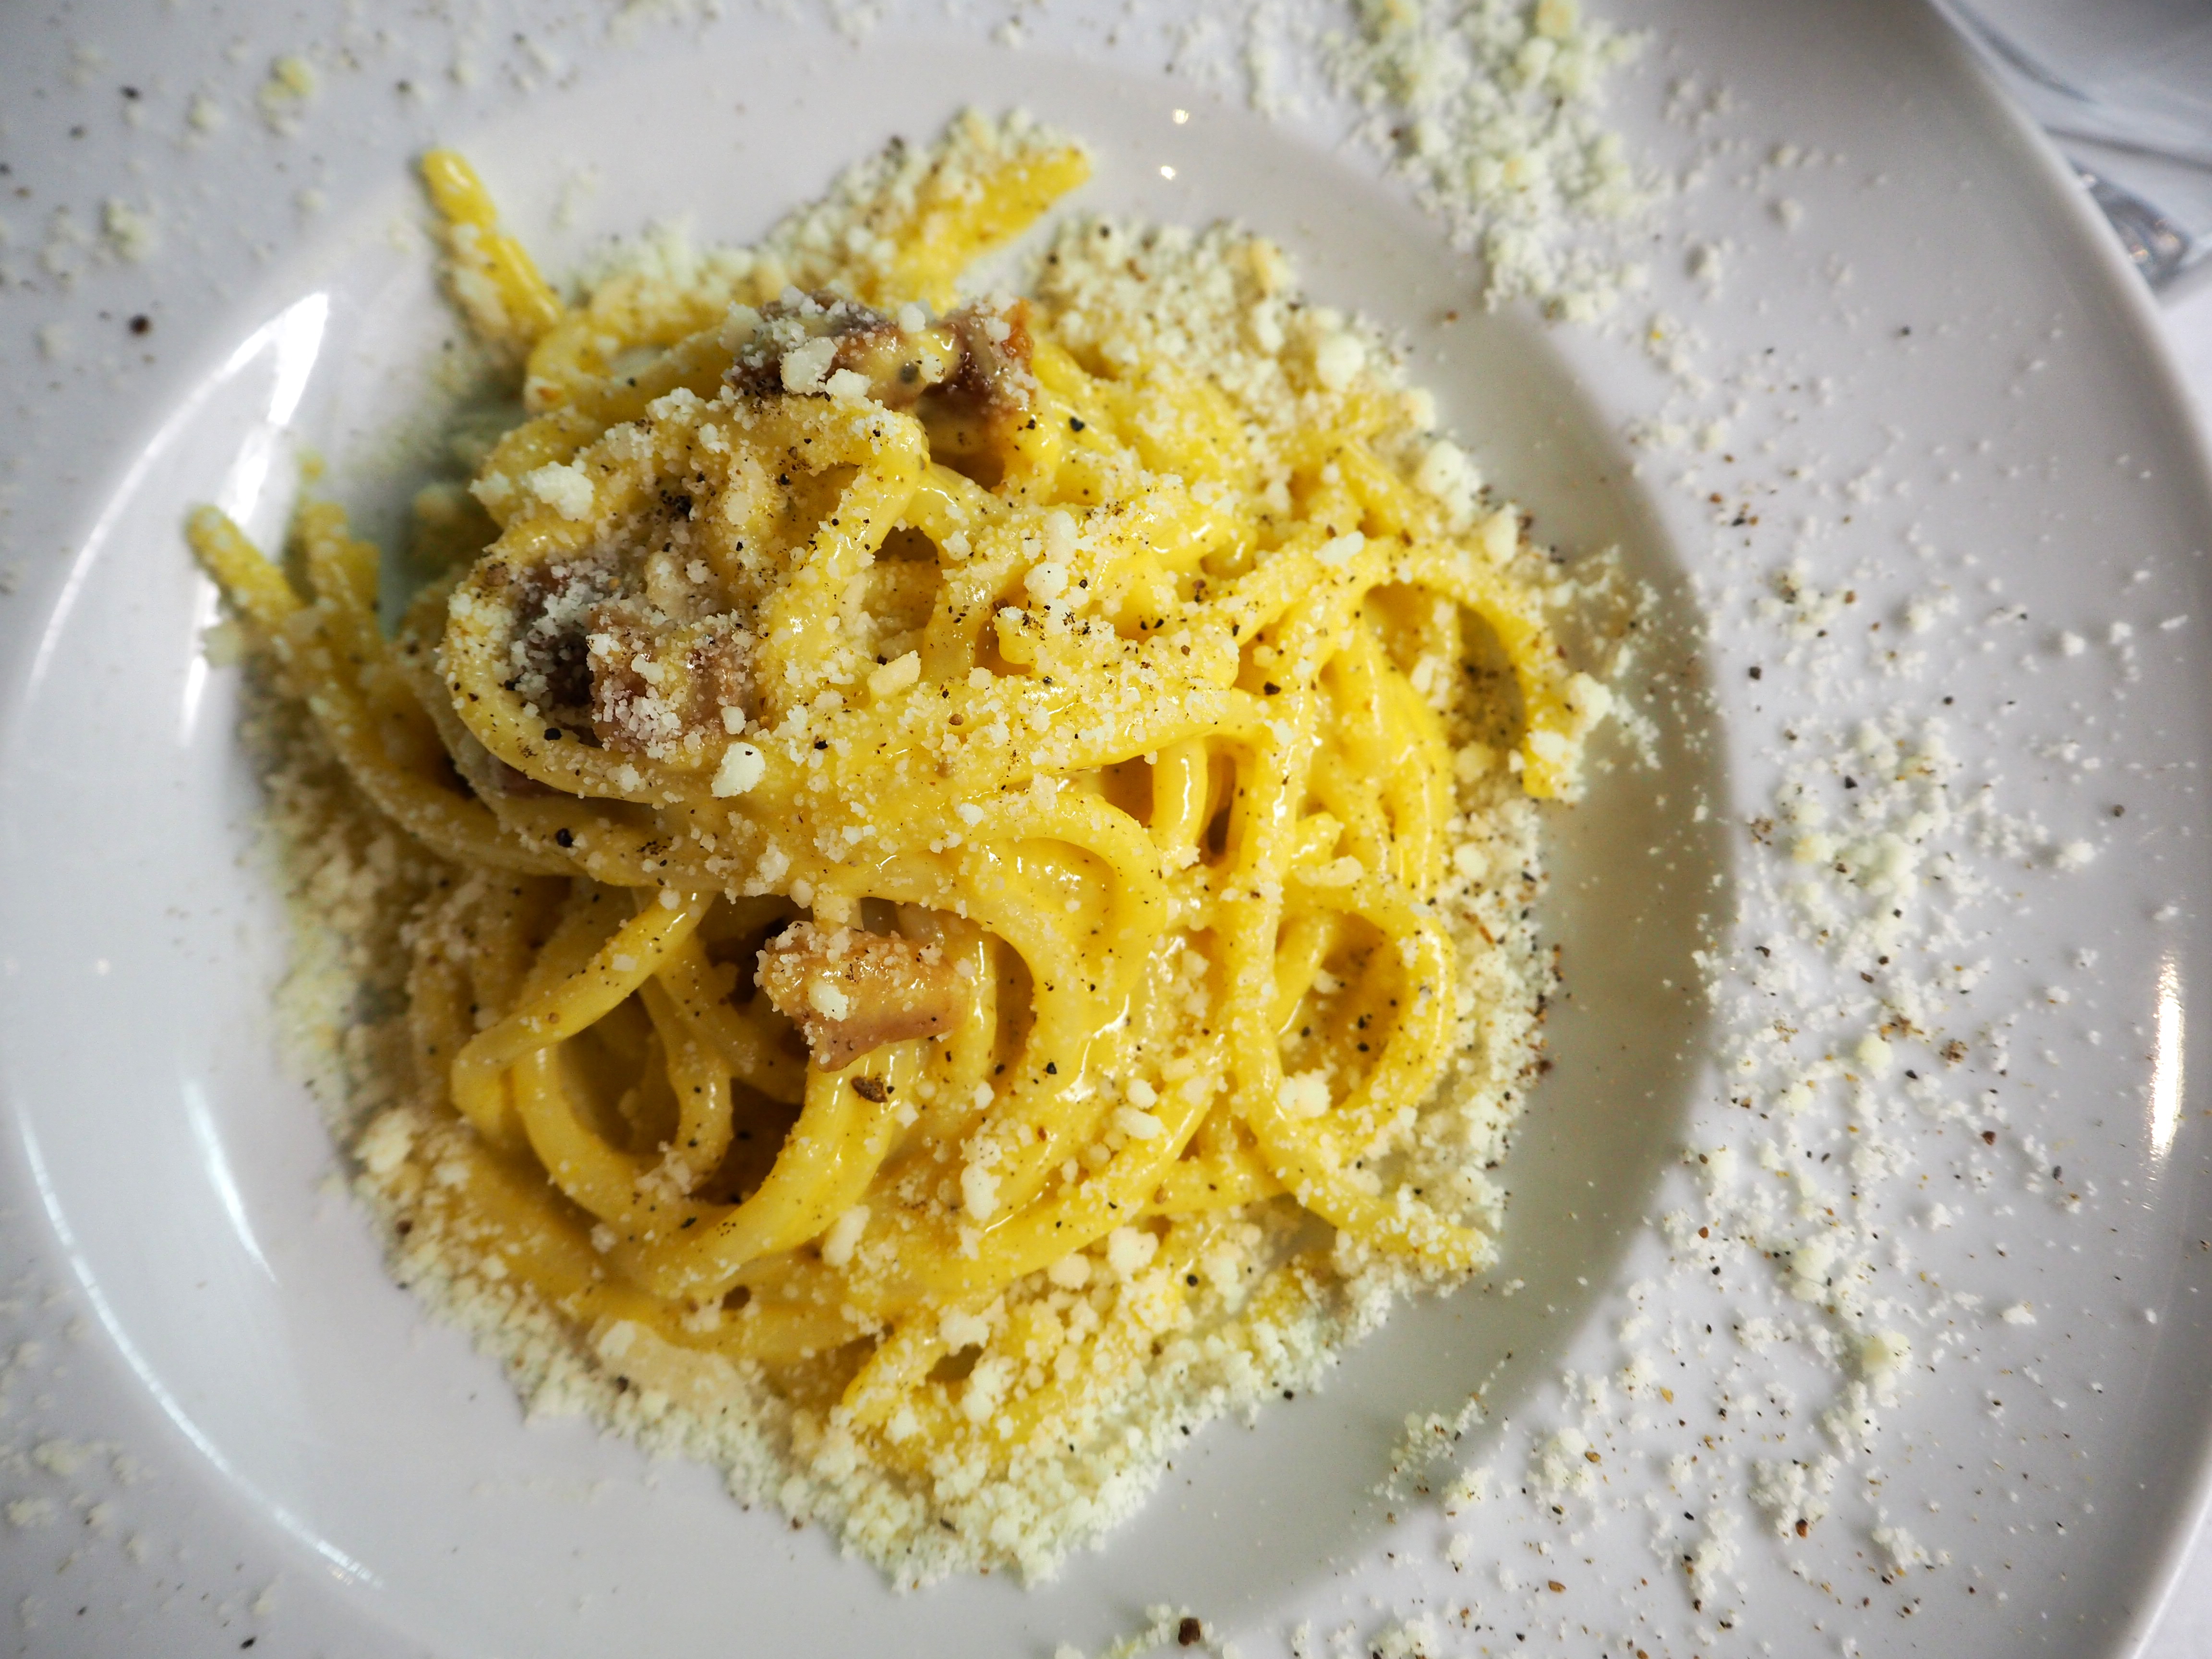 A Food Lovers Guide To Rome - Zanna Van Dijk